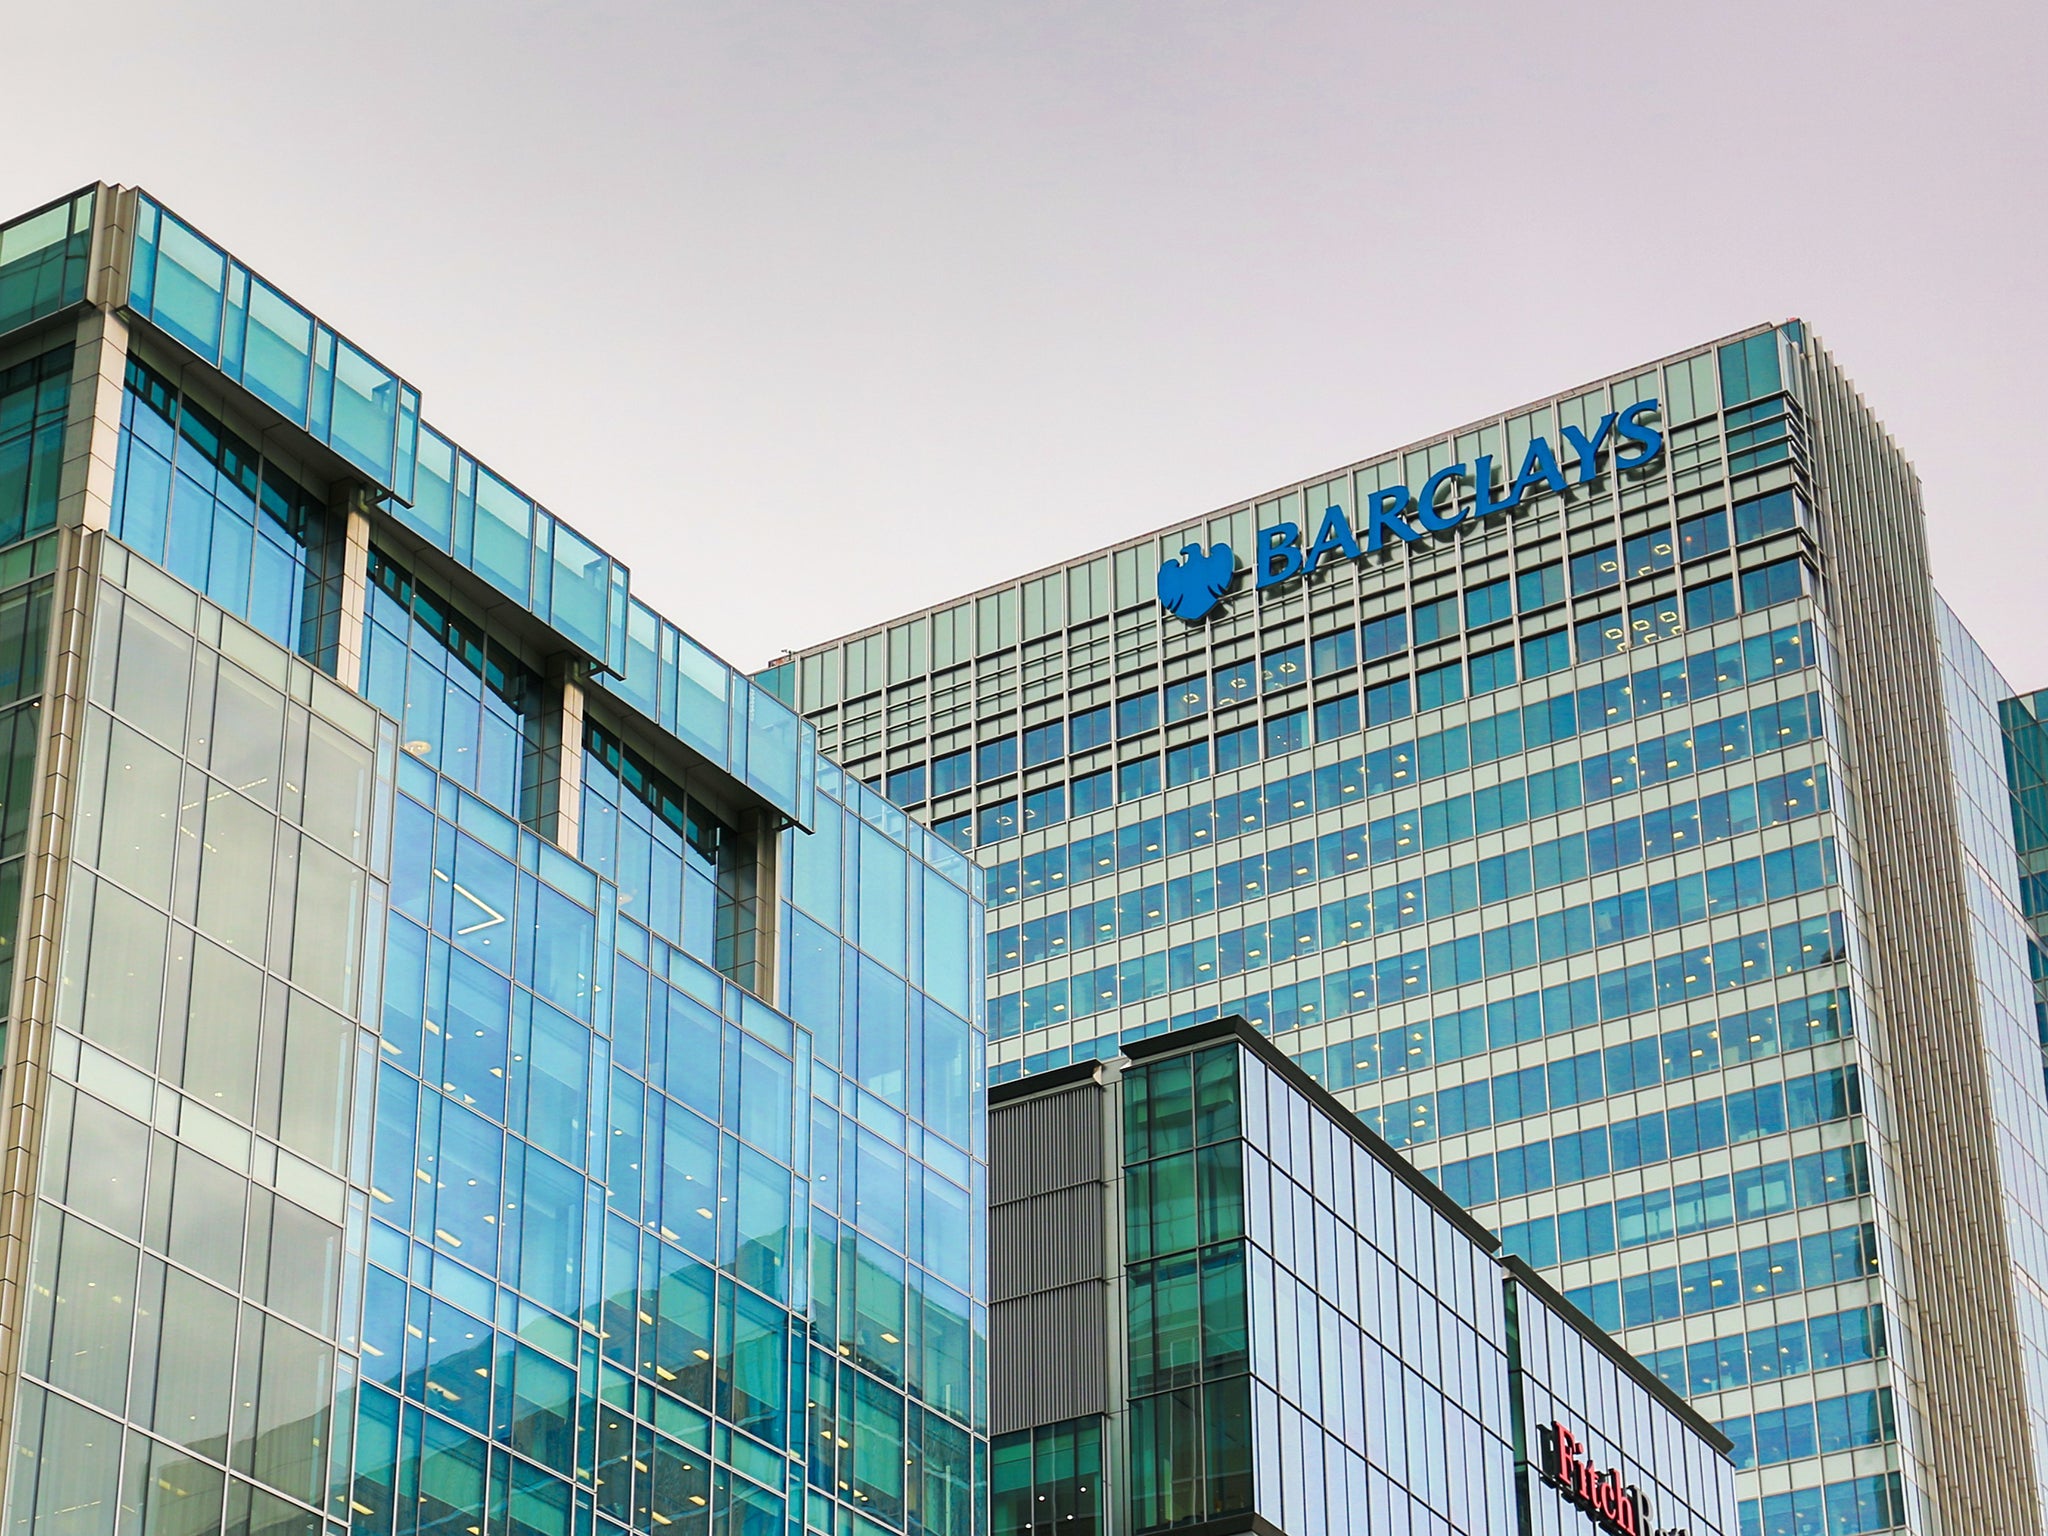 Shares in Barclays Africa tumbled on Monday